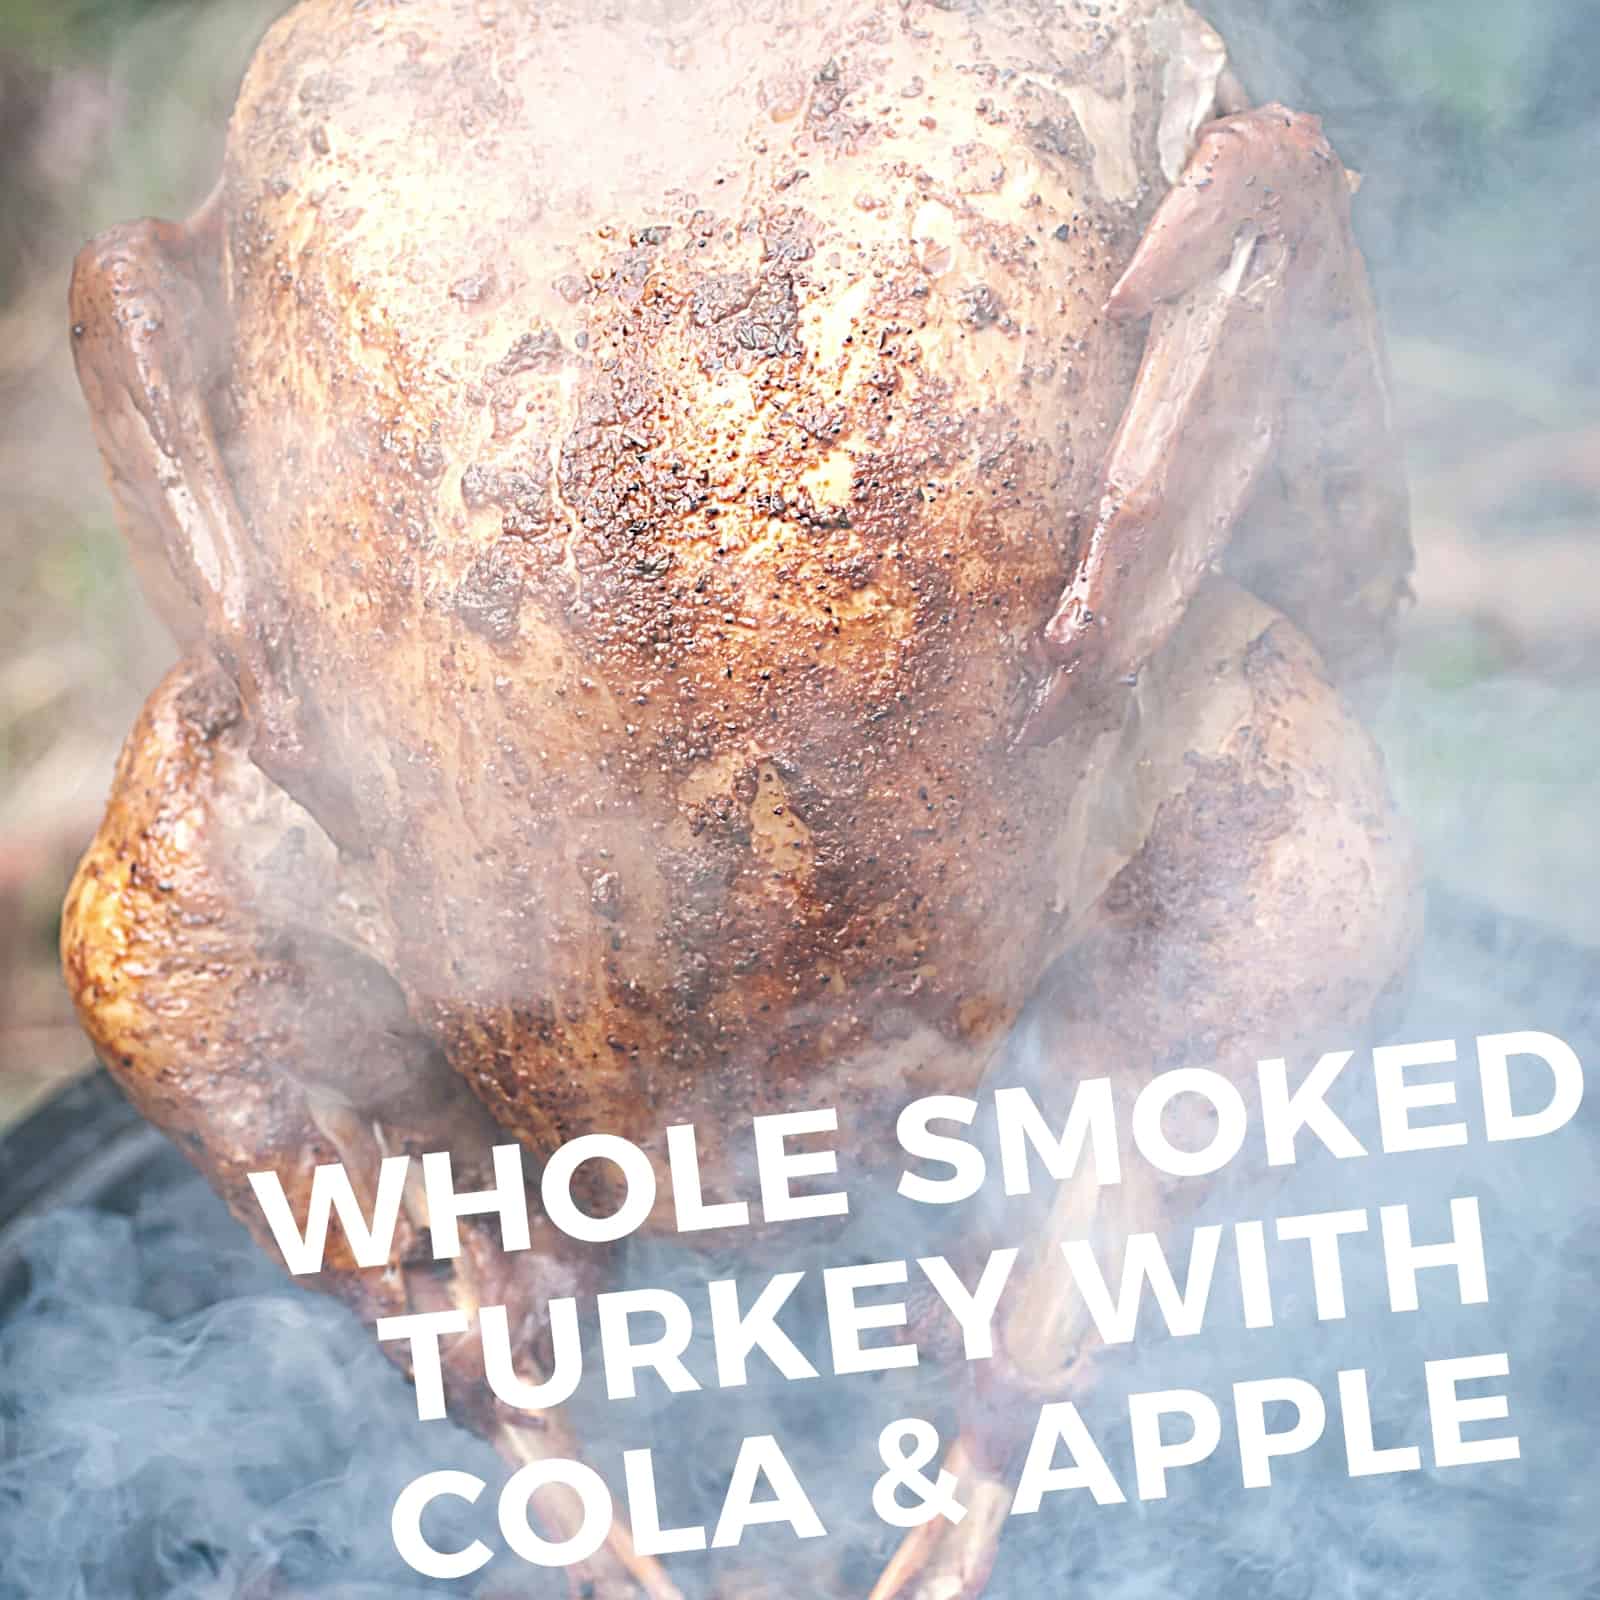 whole smoked turkey with cola & apple